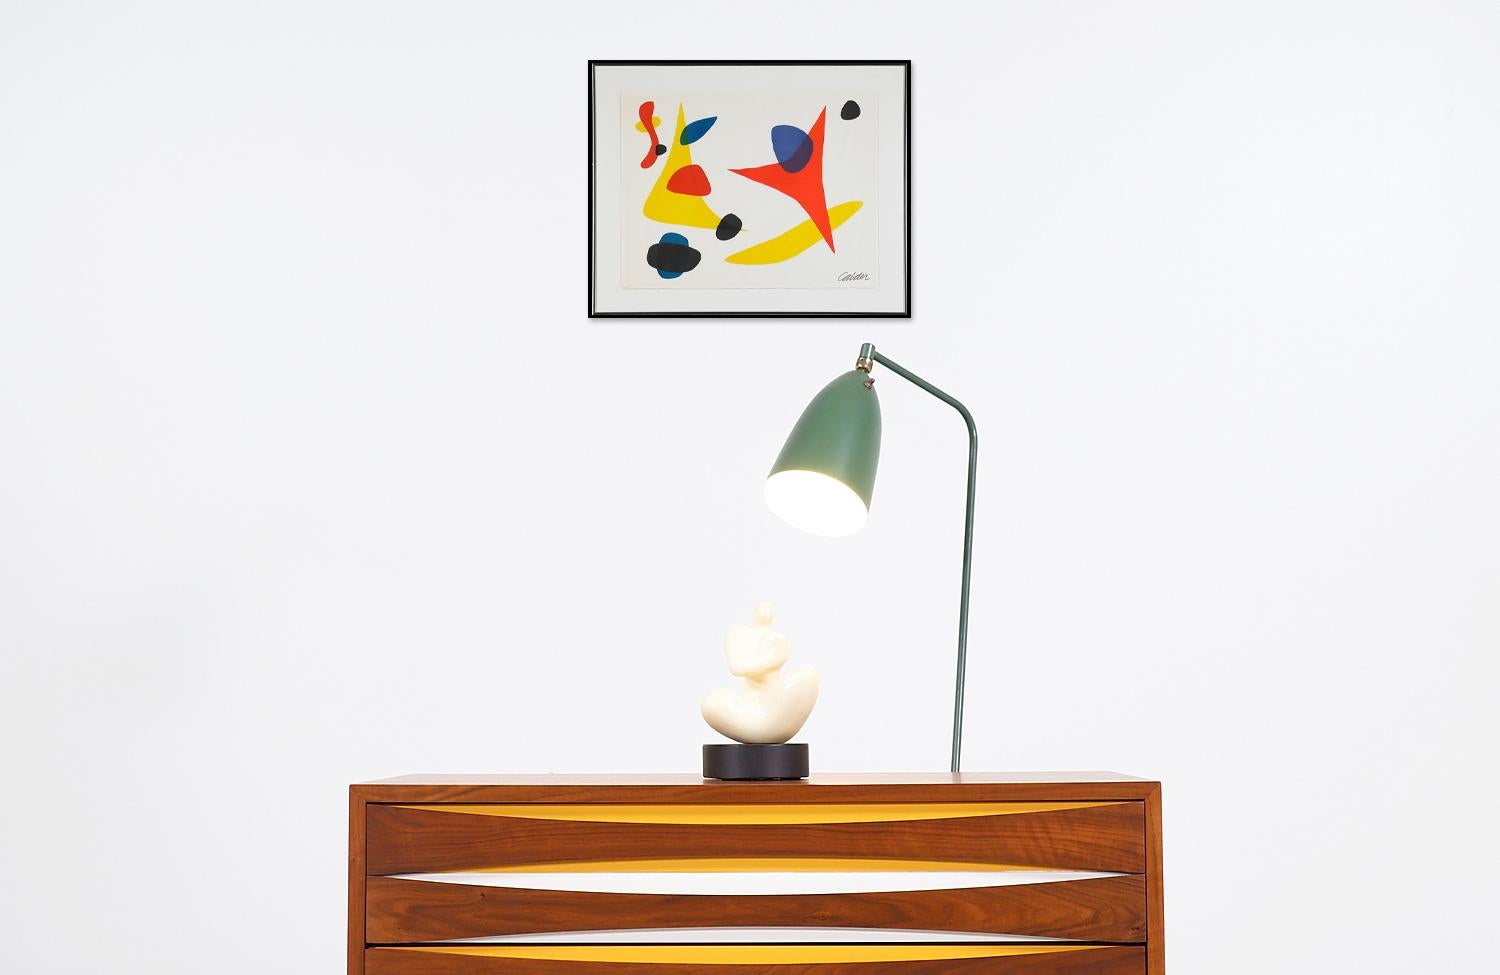 We are featuring one of our favorite Californian Modernist sculptures by Big Surs's local artist, James Hunolt, circa 1970s. This specific design, known as 